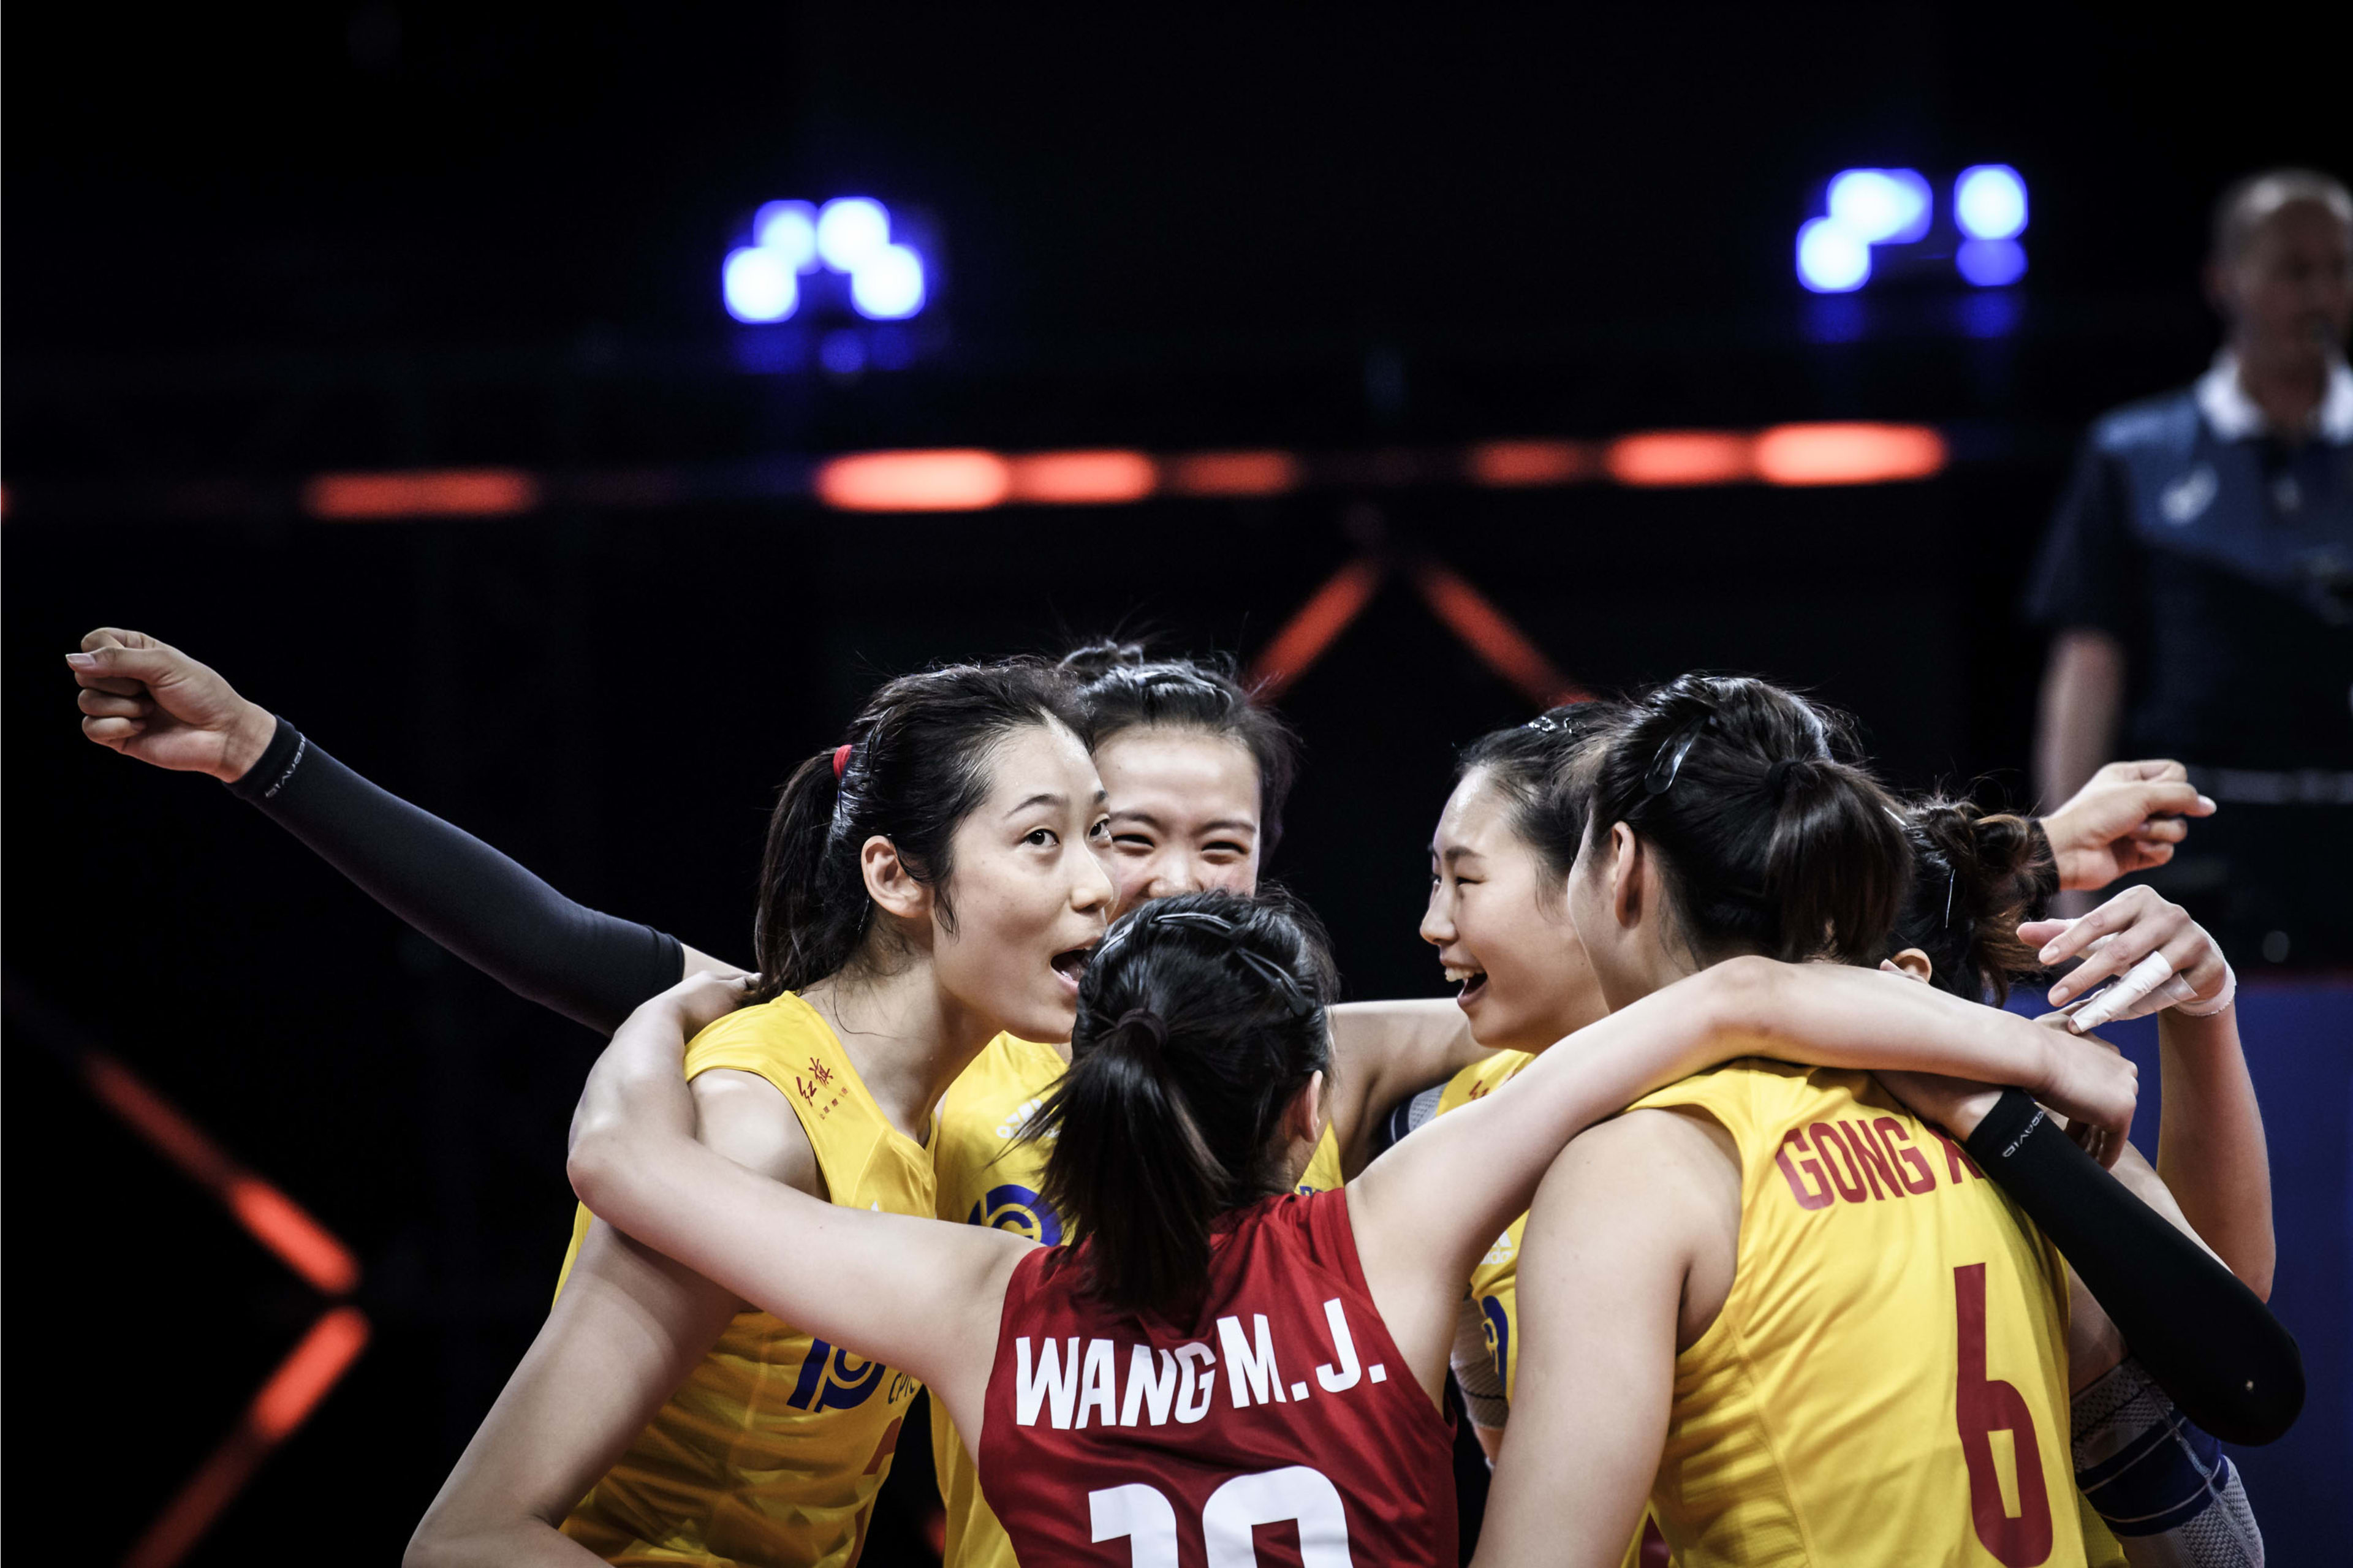 VNL 2021 tops sport TV ratings in China volleyballworld